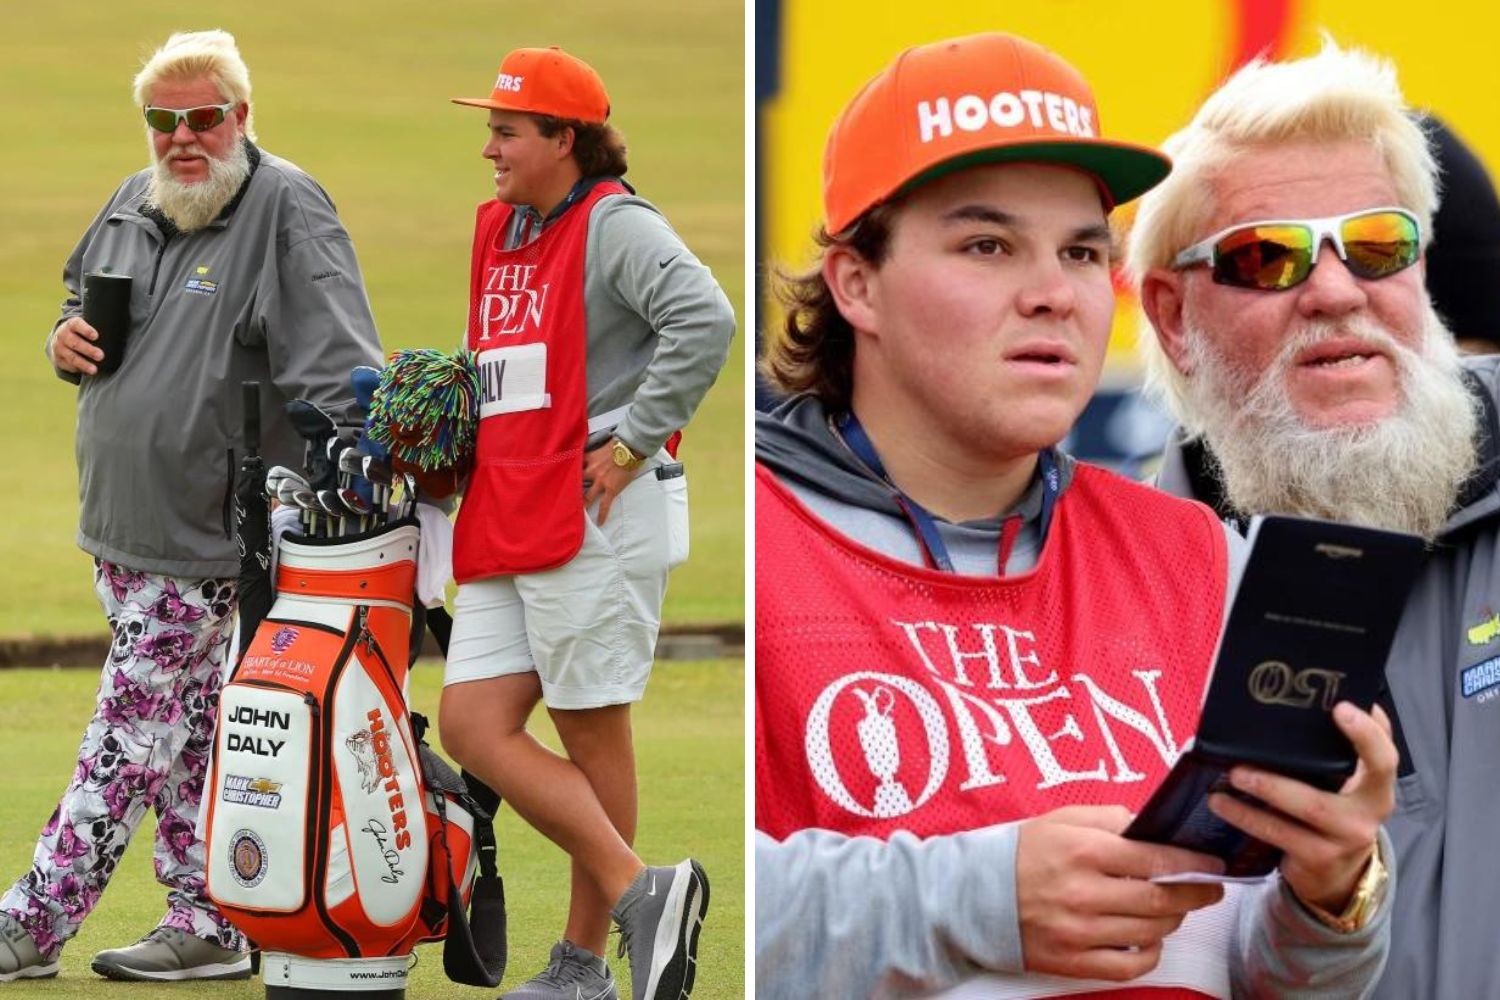 John Daly tees off for The Open with Hooters golf bag as his caddy, son John II, wears matching hat at St Andrews